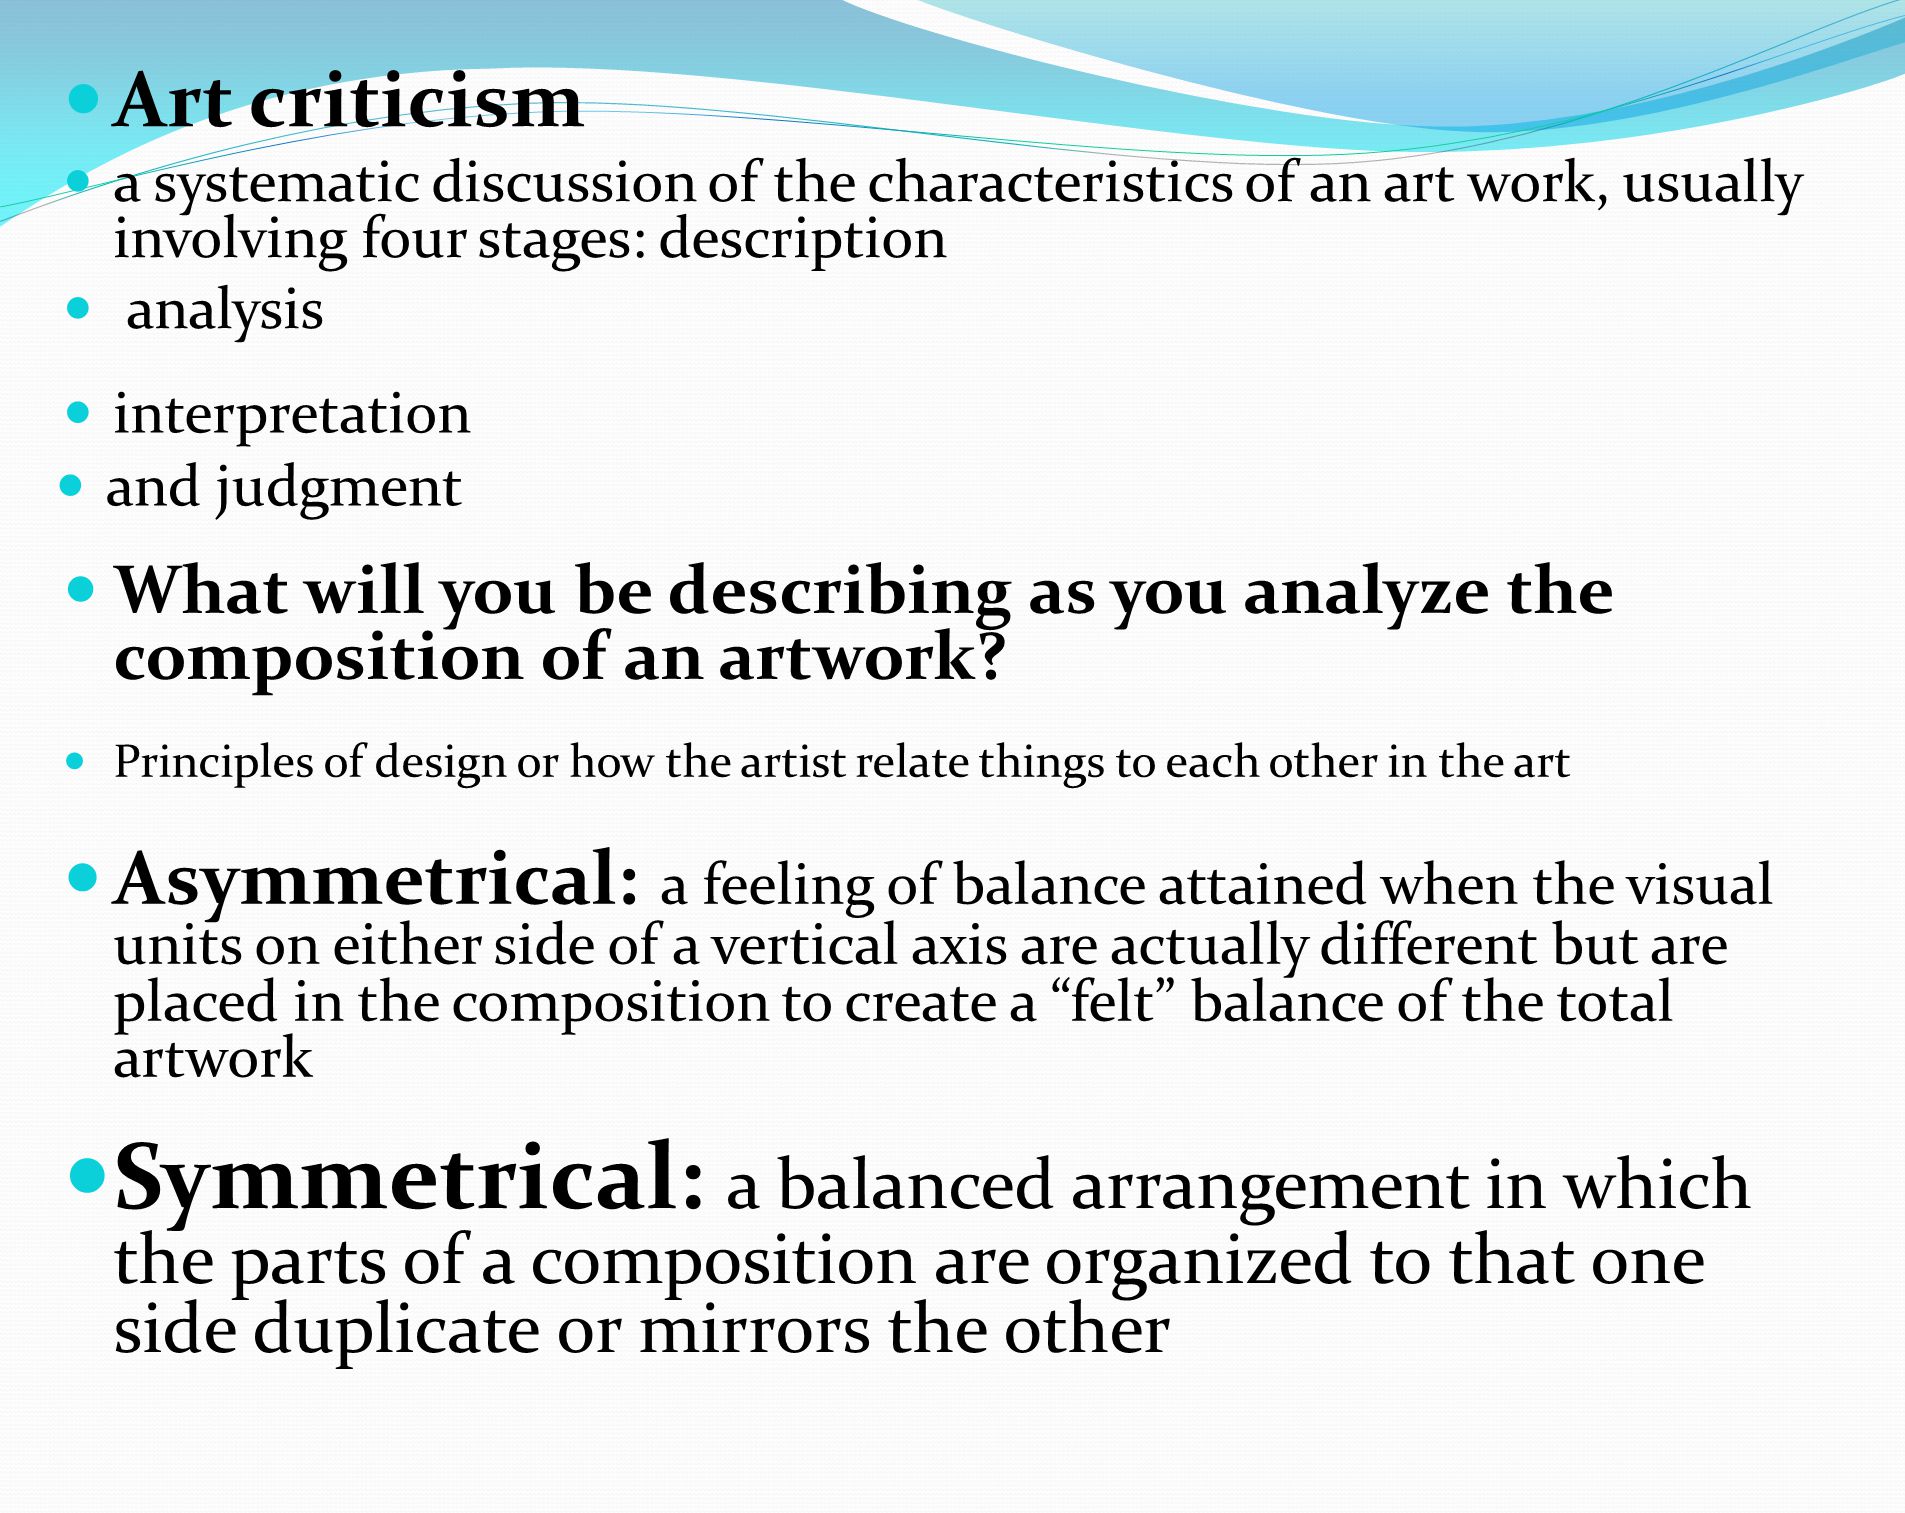 Art criticism a systematic discussion of the characteristics of an art work, usually involving four stages: description analysis interpretation and judgment What will you be describing as you analyze the composition of an artwork.